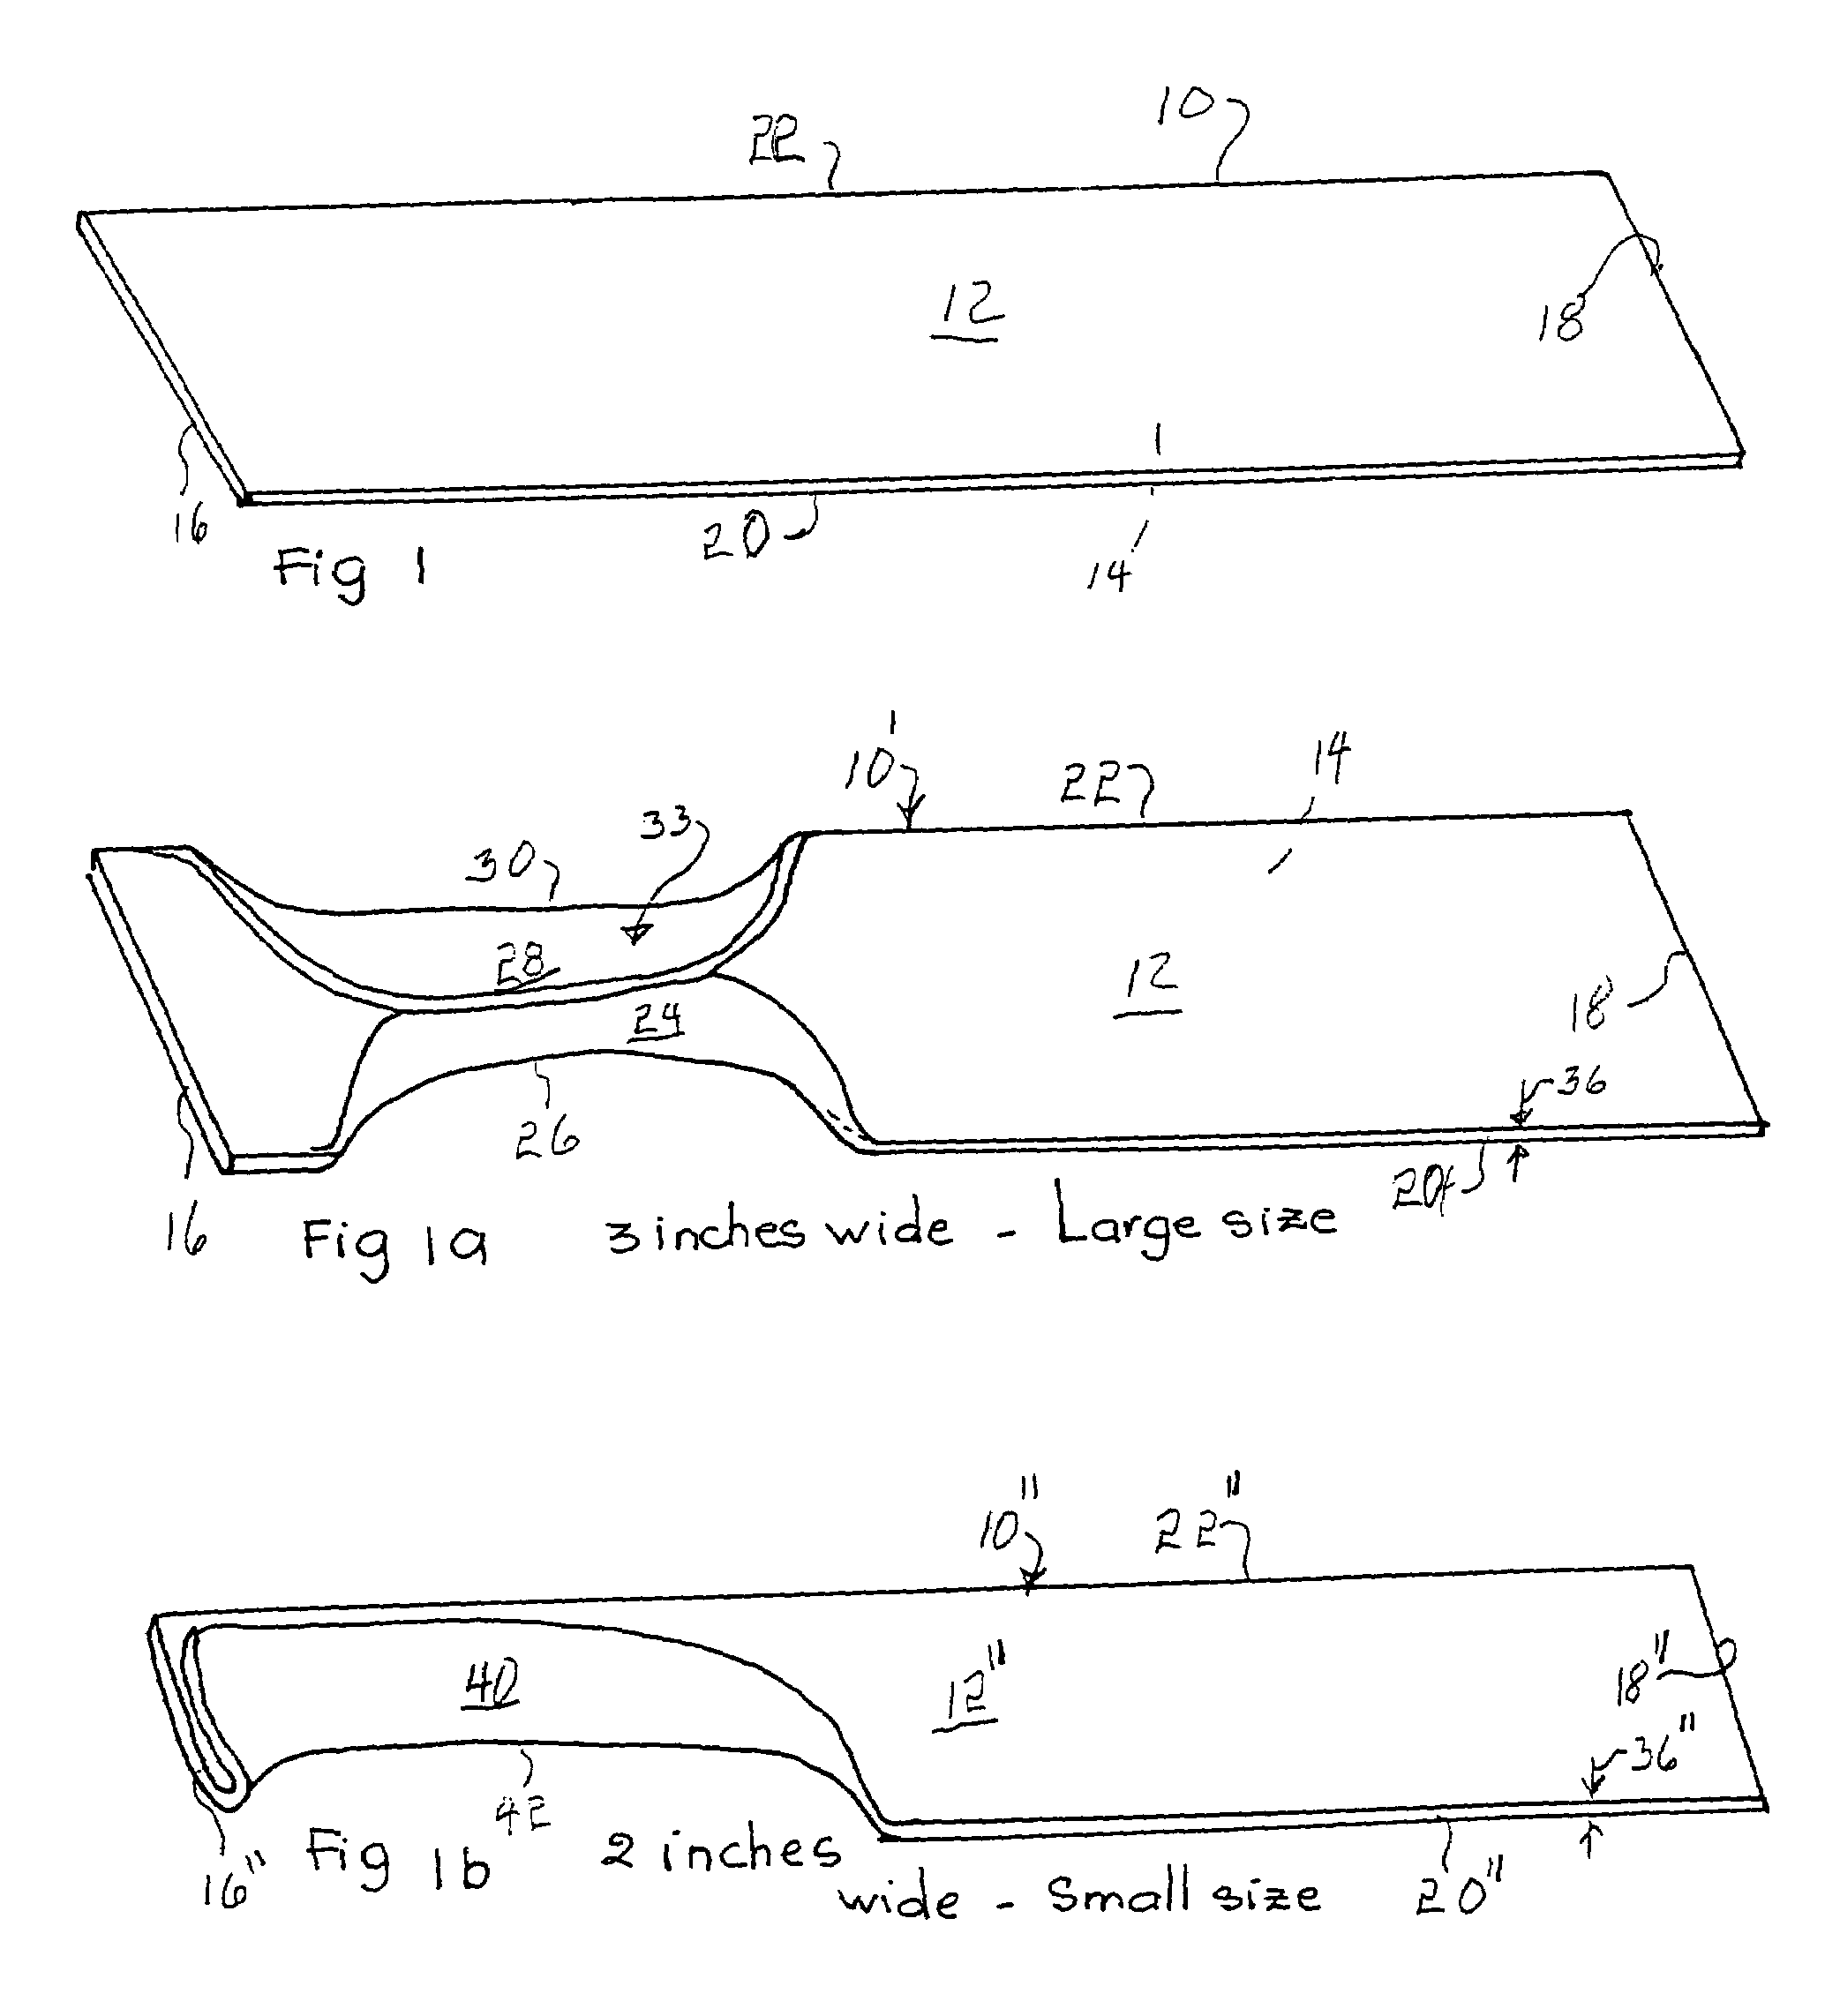 Erectile aide and method of attaching same